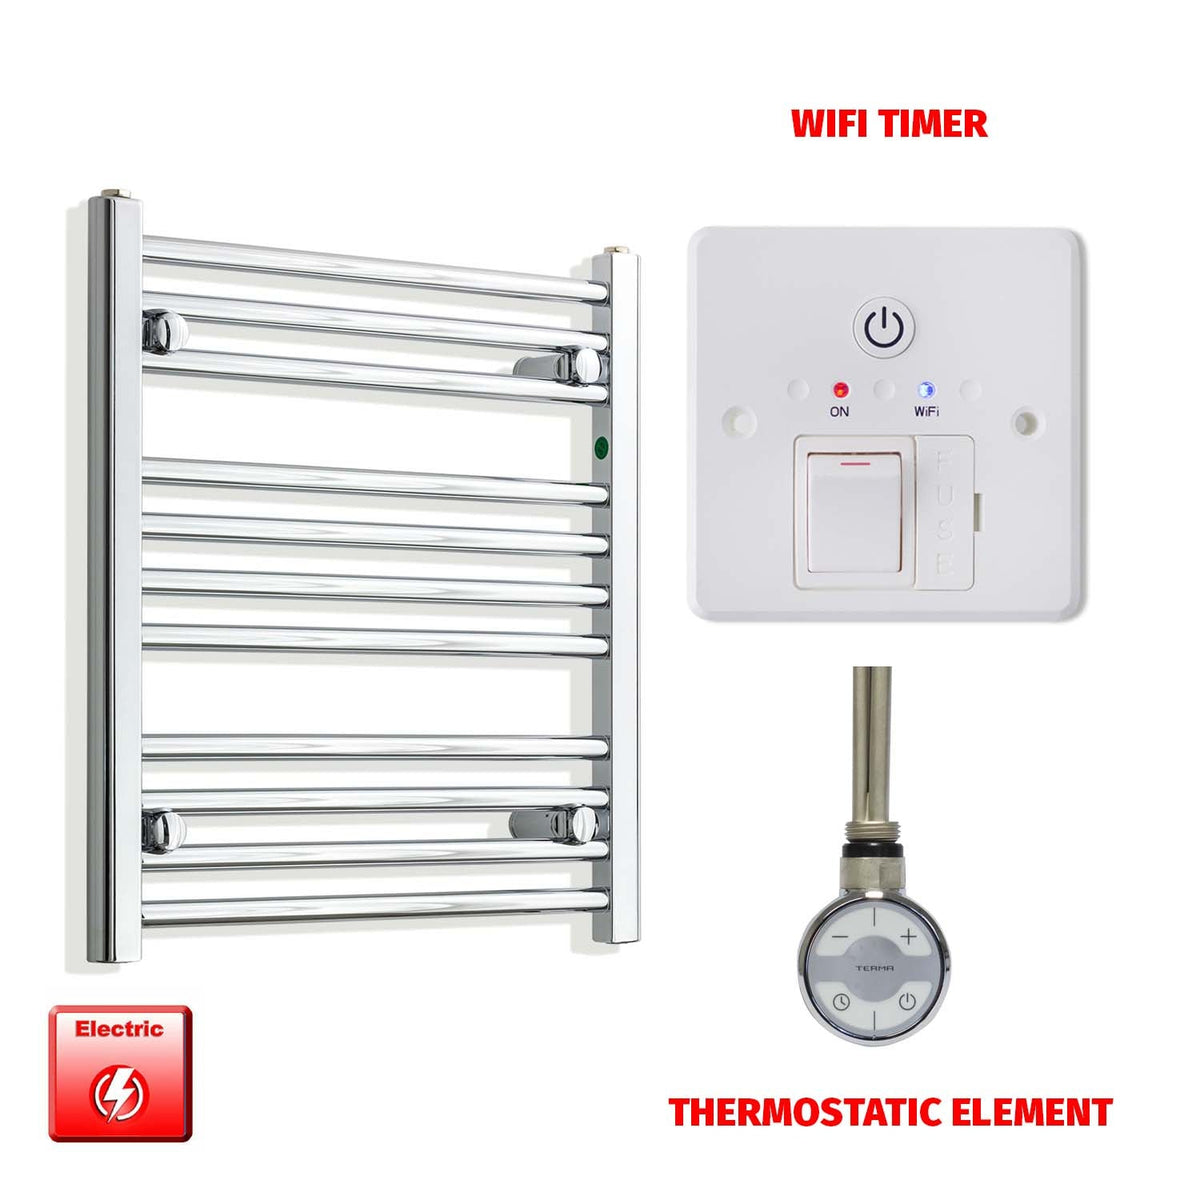 600mm High 550mm Wide Pre-Filled Electric Heated Towel Radiator Chrome HTR MOA Thermostatic element Wifi timer